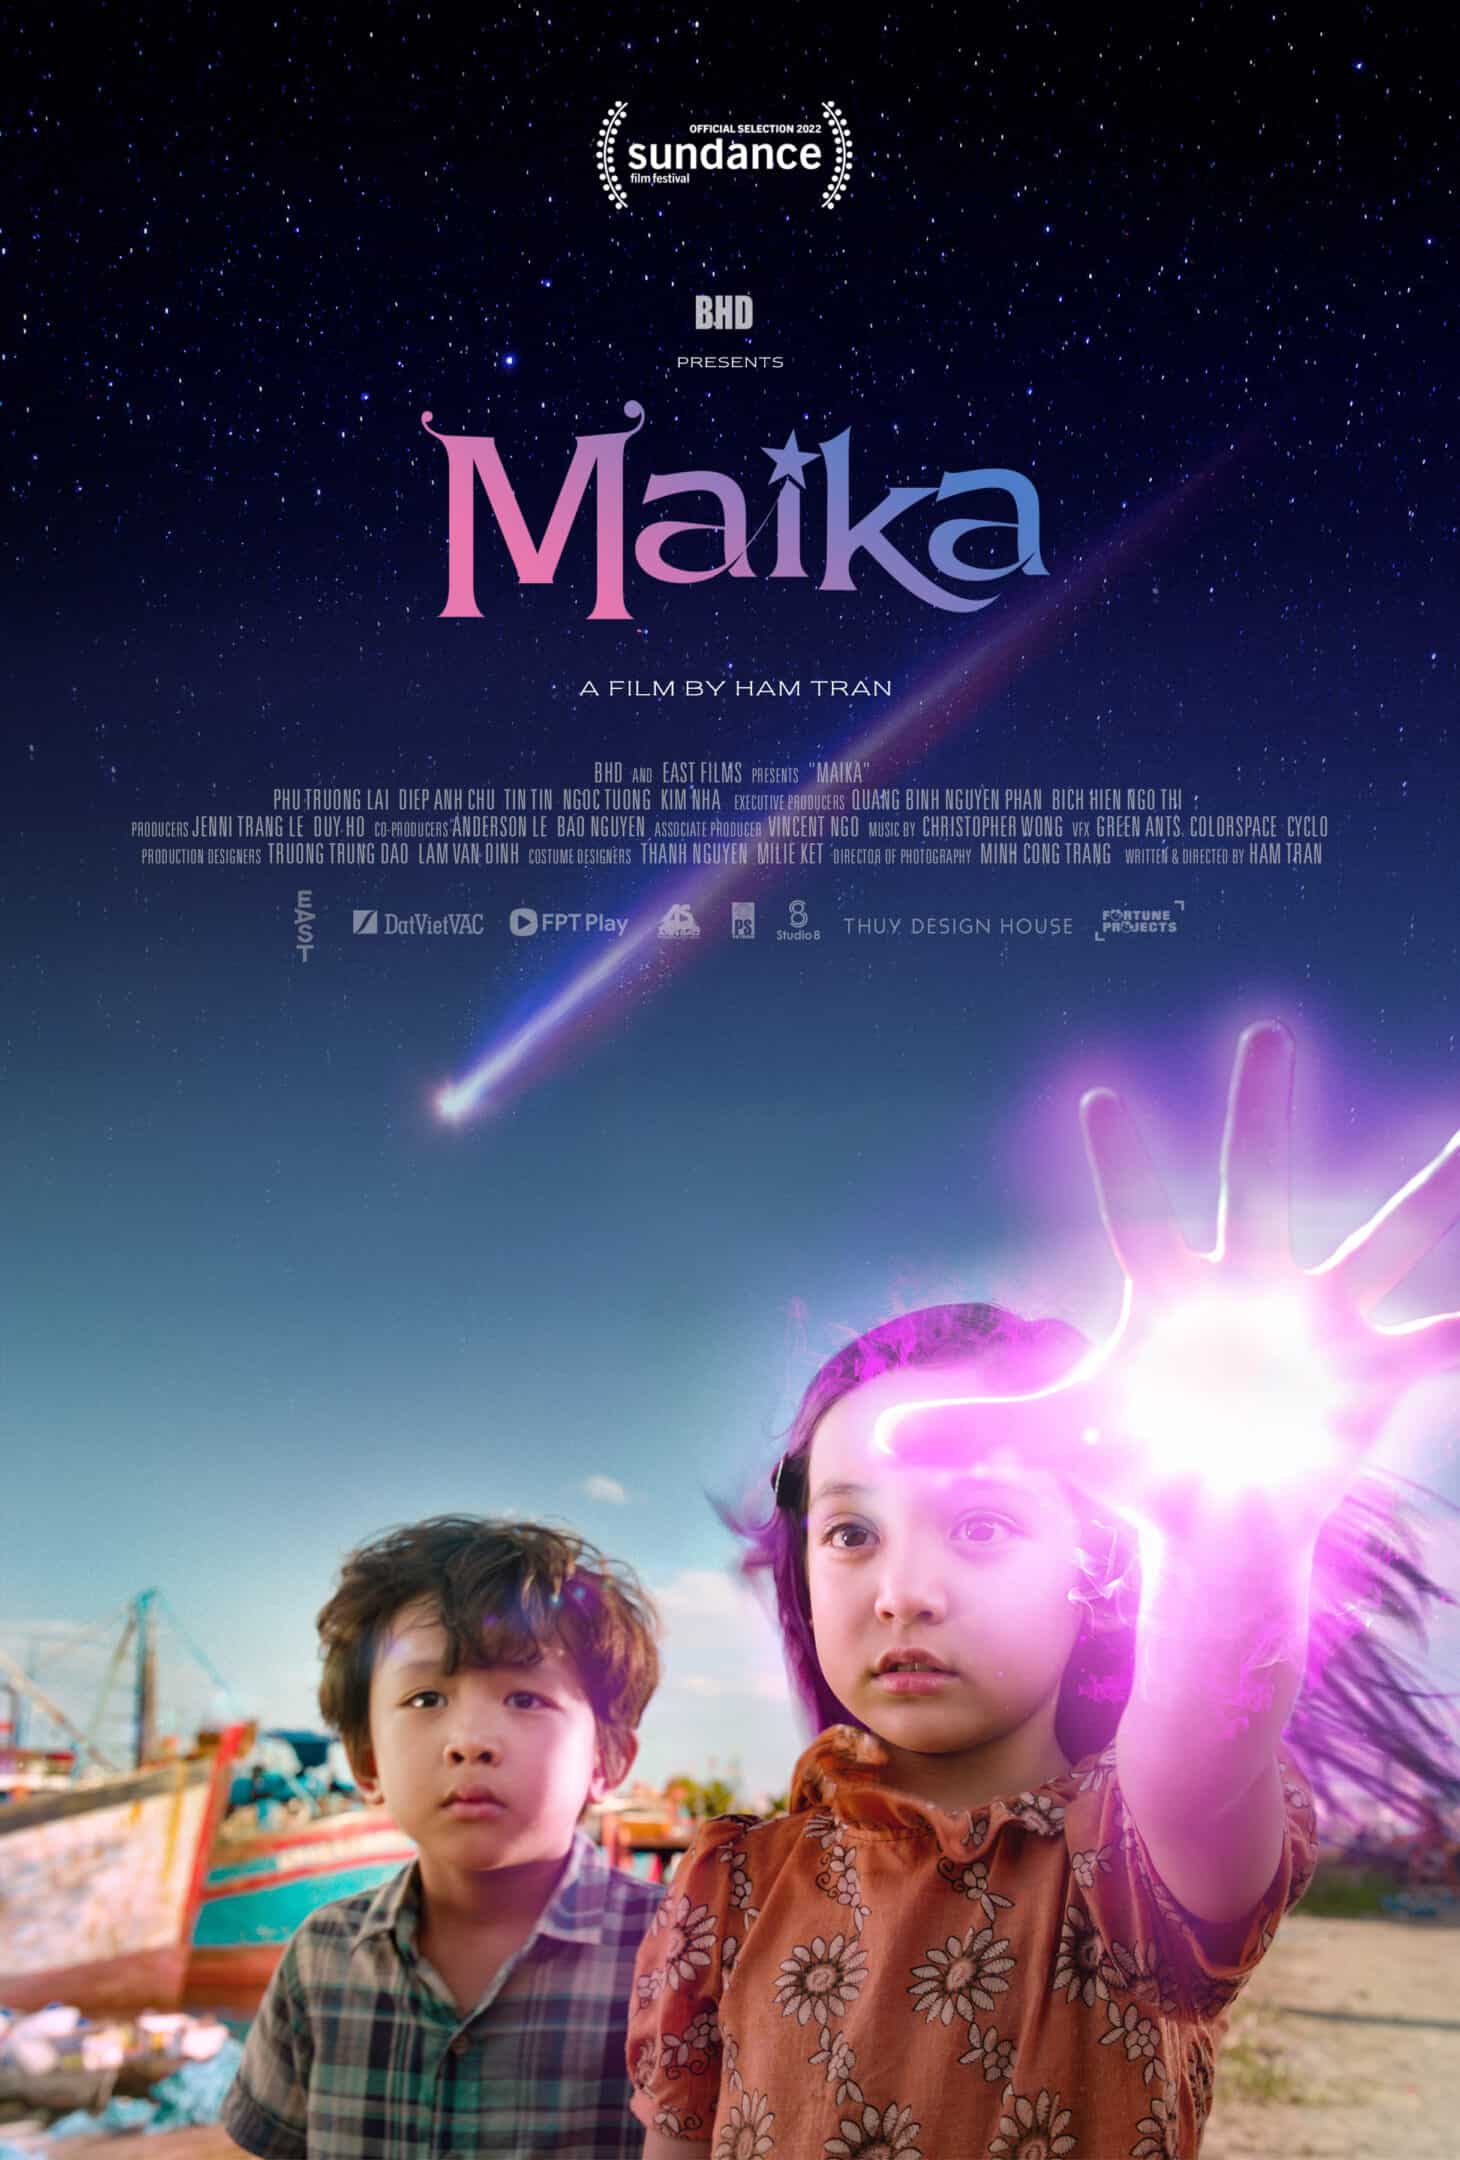 The poster for Maika in English